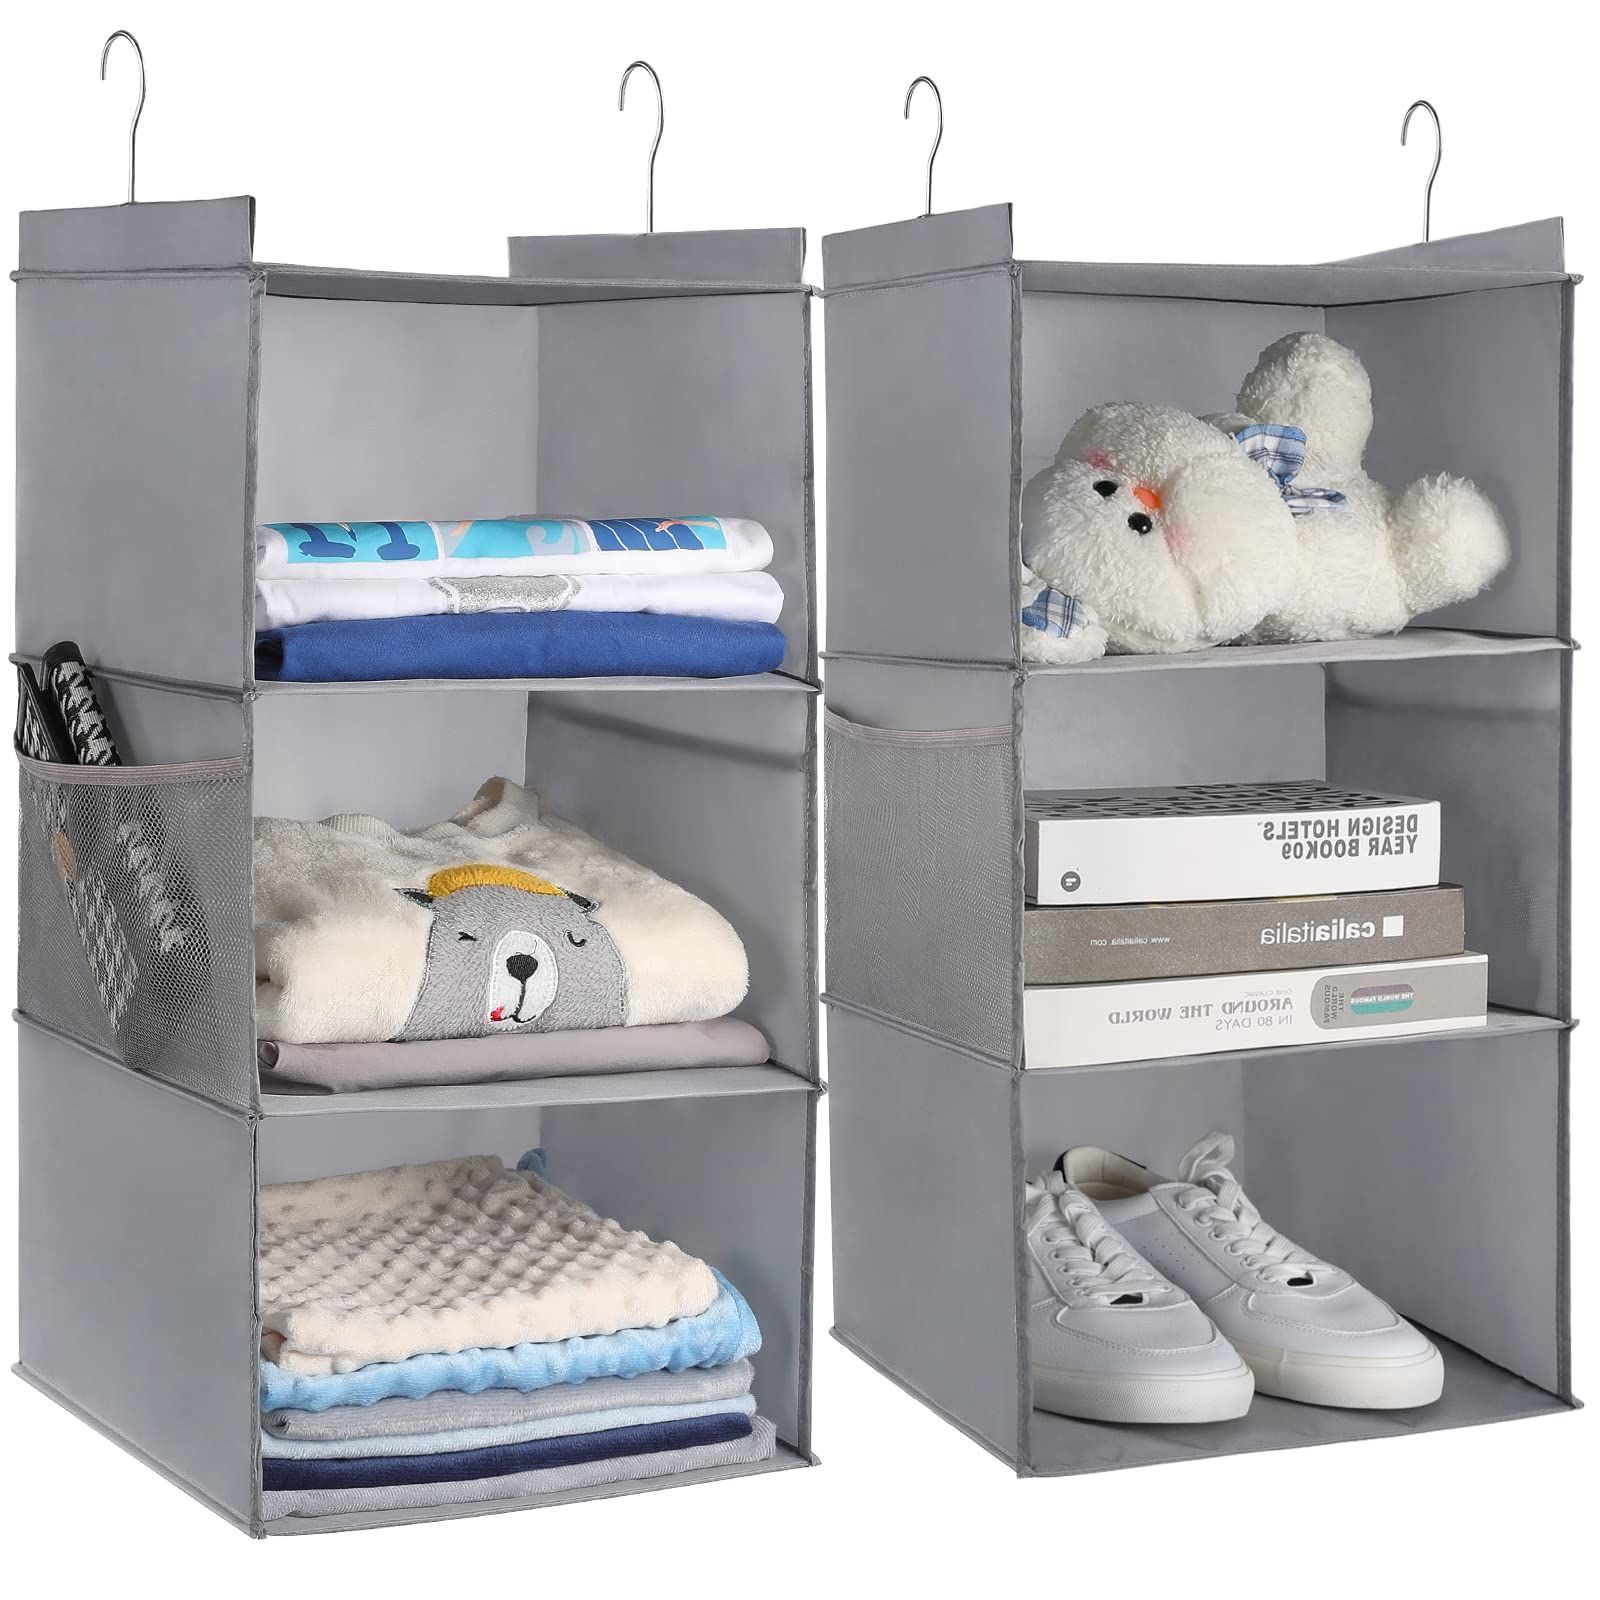 Amazon: Layerspace 2 Pack Hanging Closet Organizer 3 Shelf, Large Size Hanging  Shelves For Closet With Side Pocket, Linen, 12.2" D X 12.2" W X 27.9" H,  Dark Grey : Home & Kitchen With Regard To Most Recent 3 Shelf Hanging Shelves Wardrobes (Photo 9 of 10)